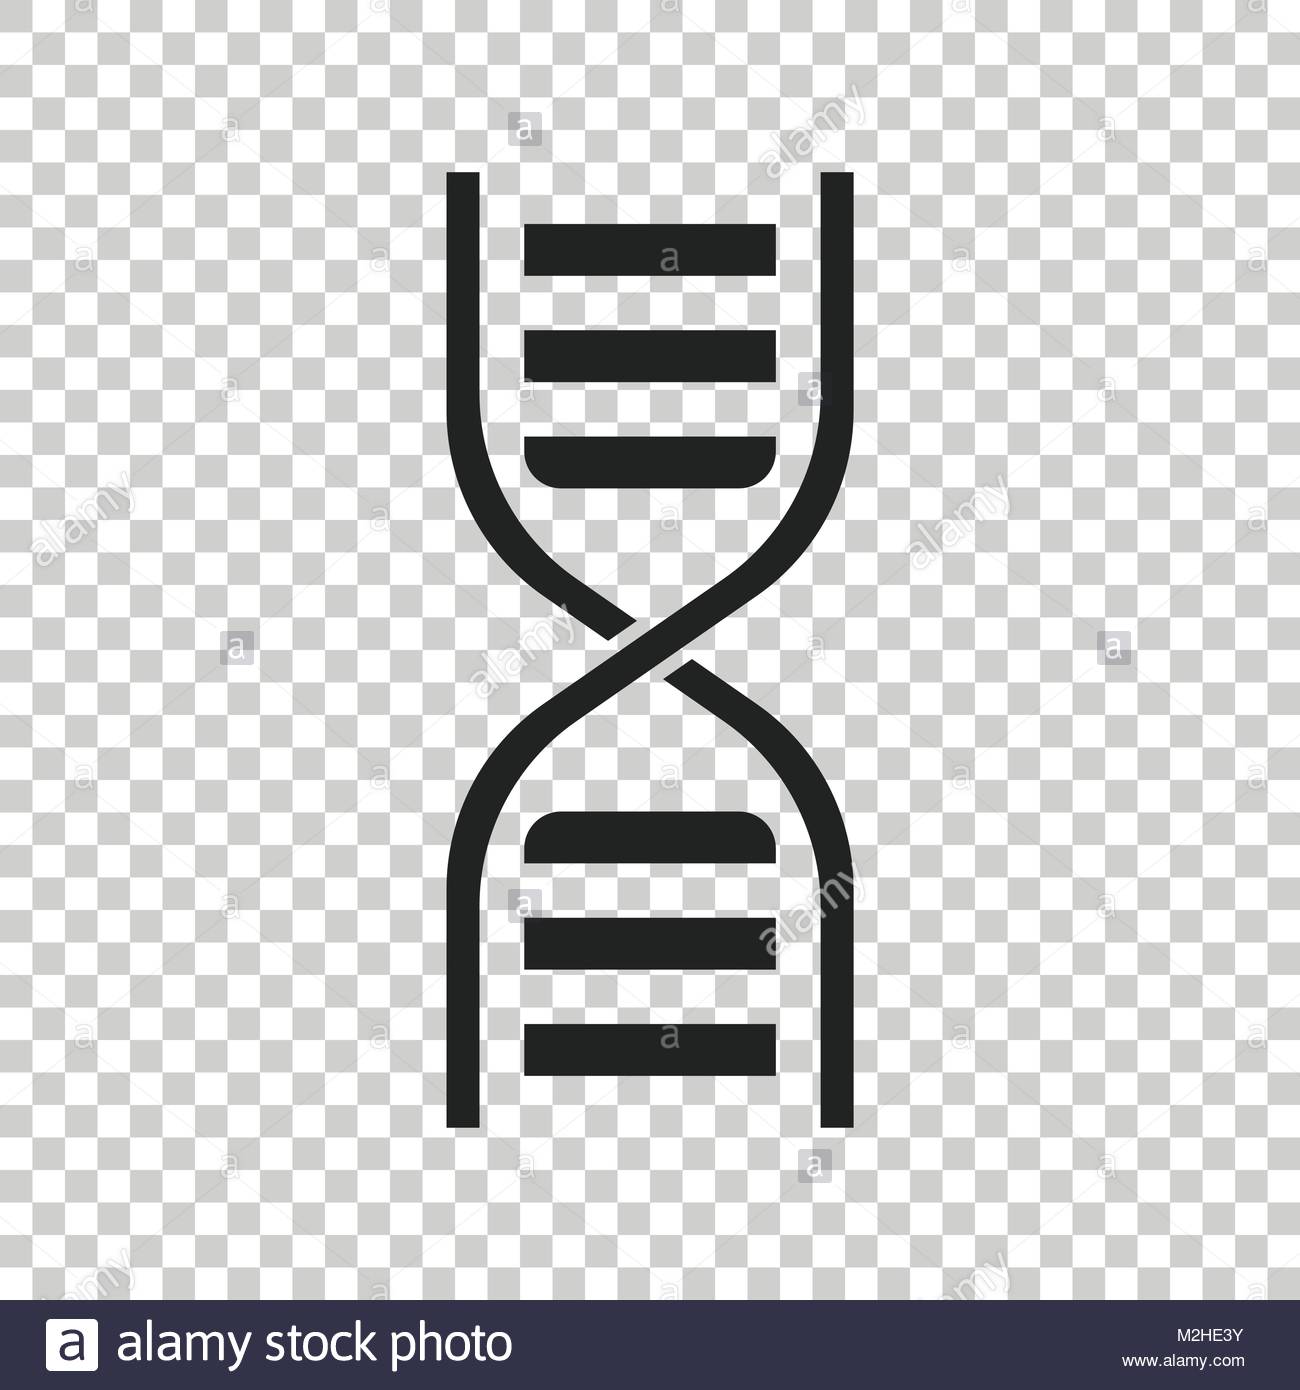 Stock vector of DNA simple icon on white background. Vector 